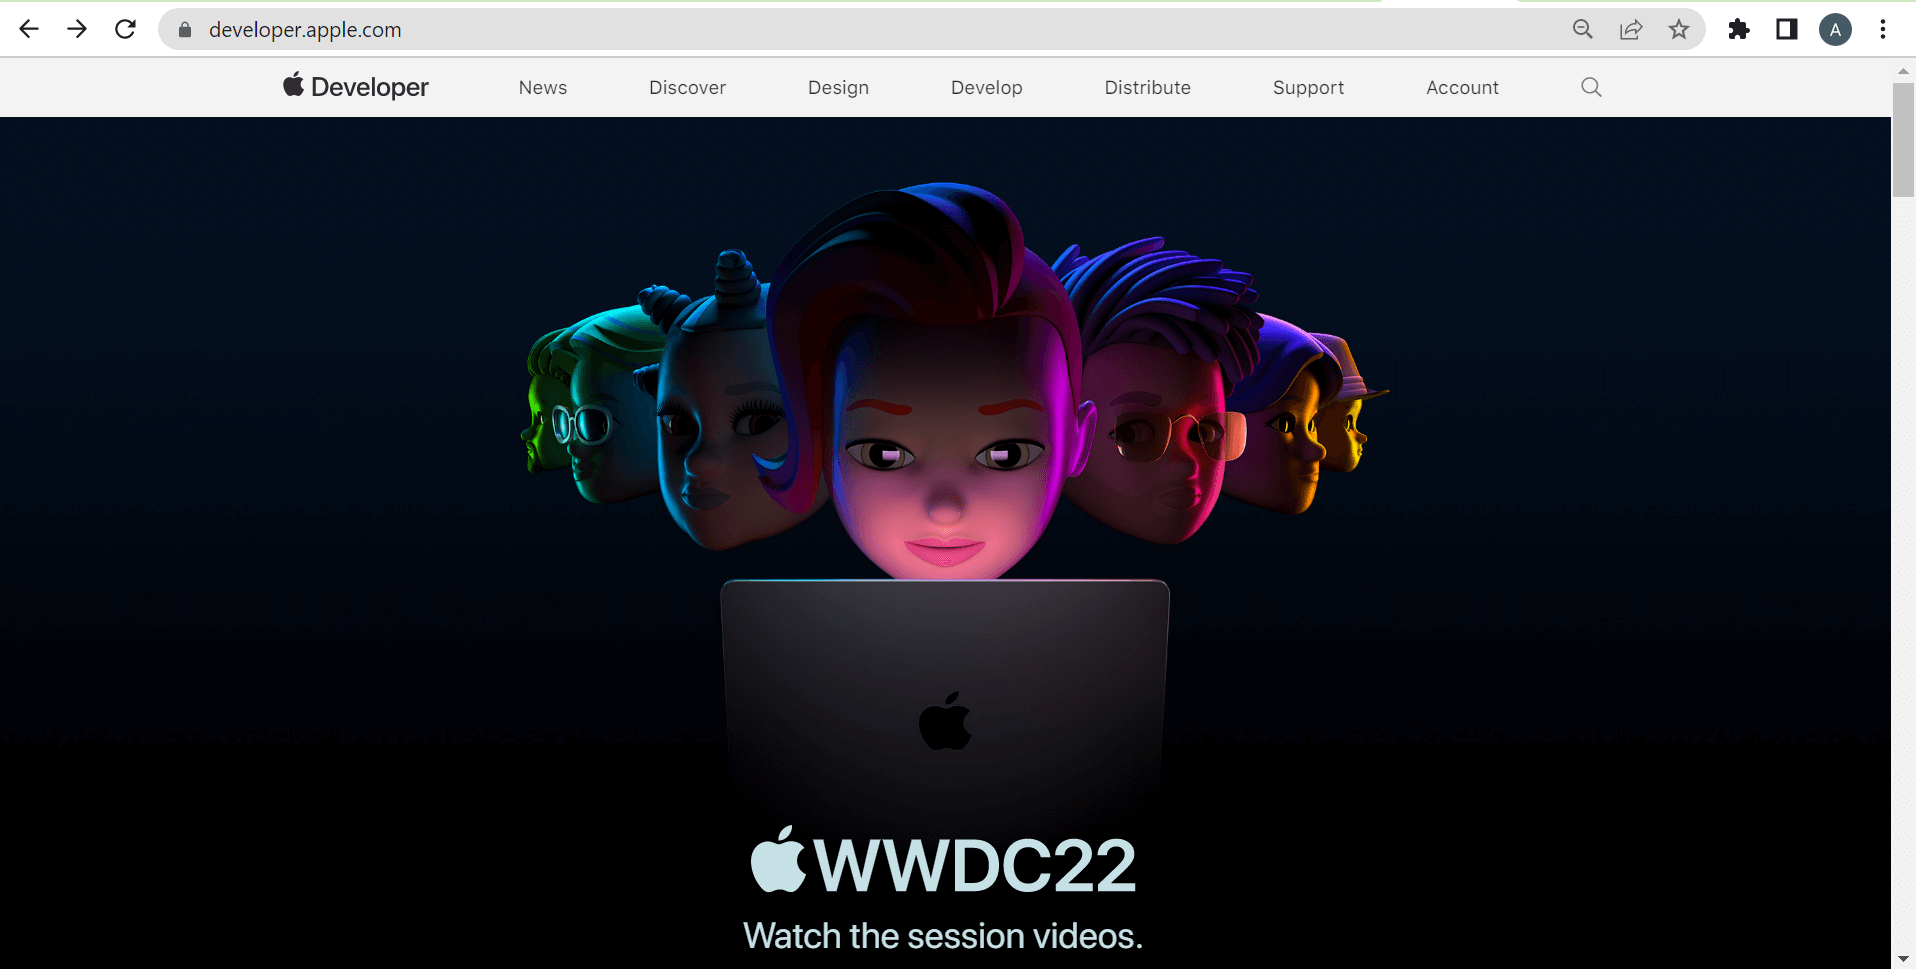 Apple developers page